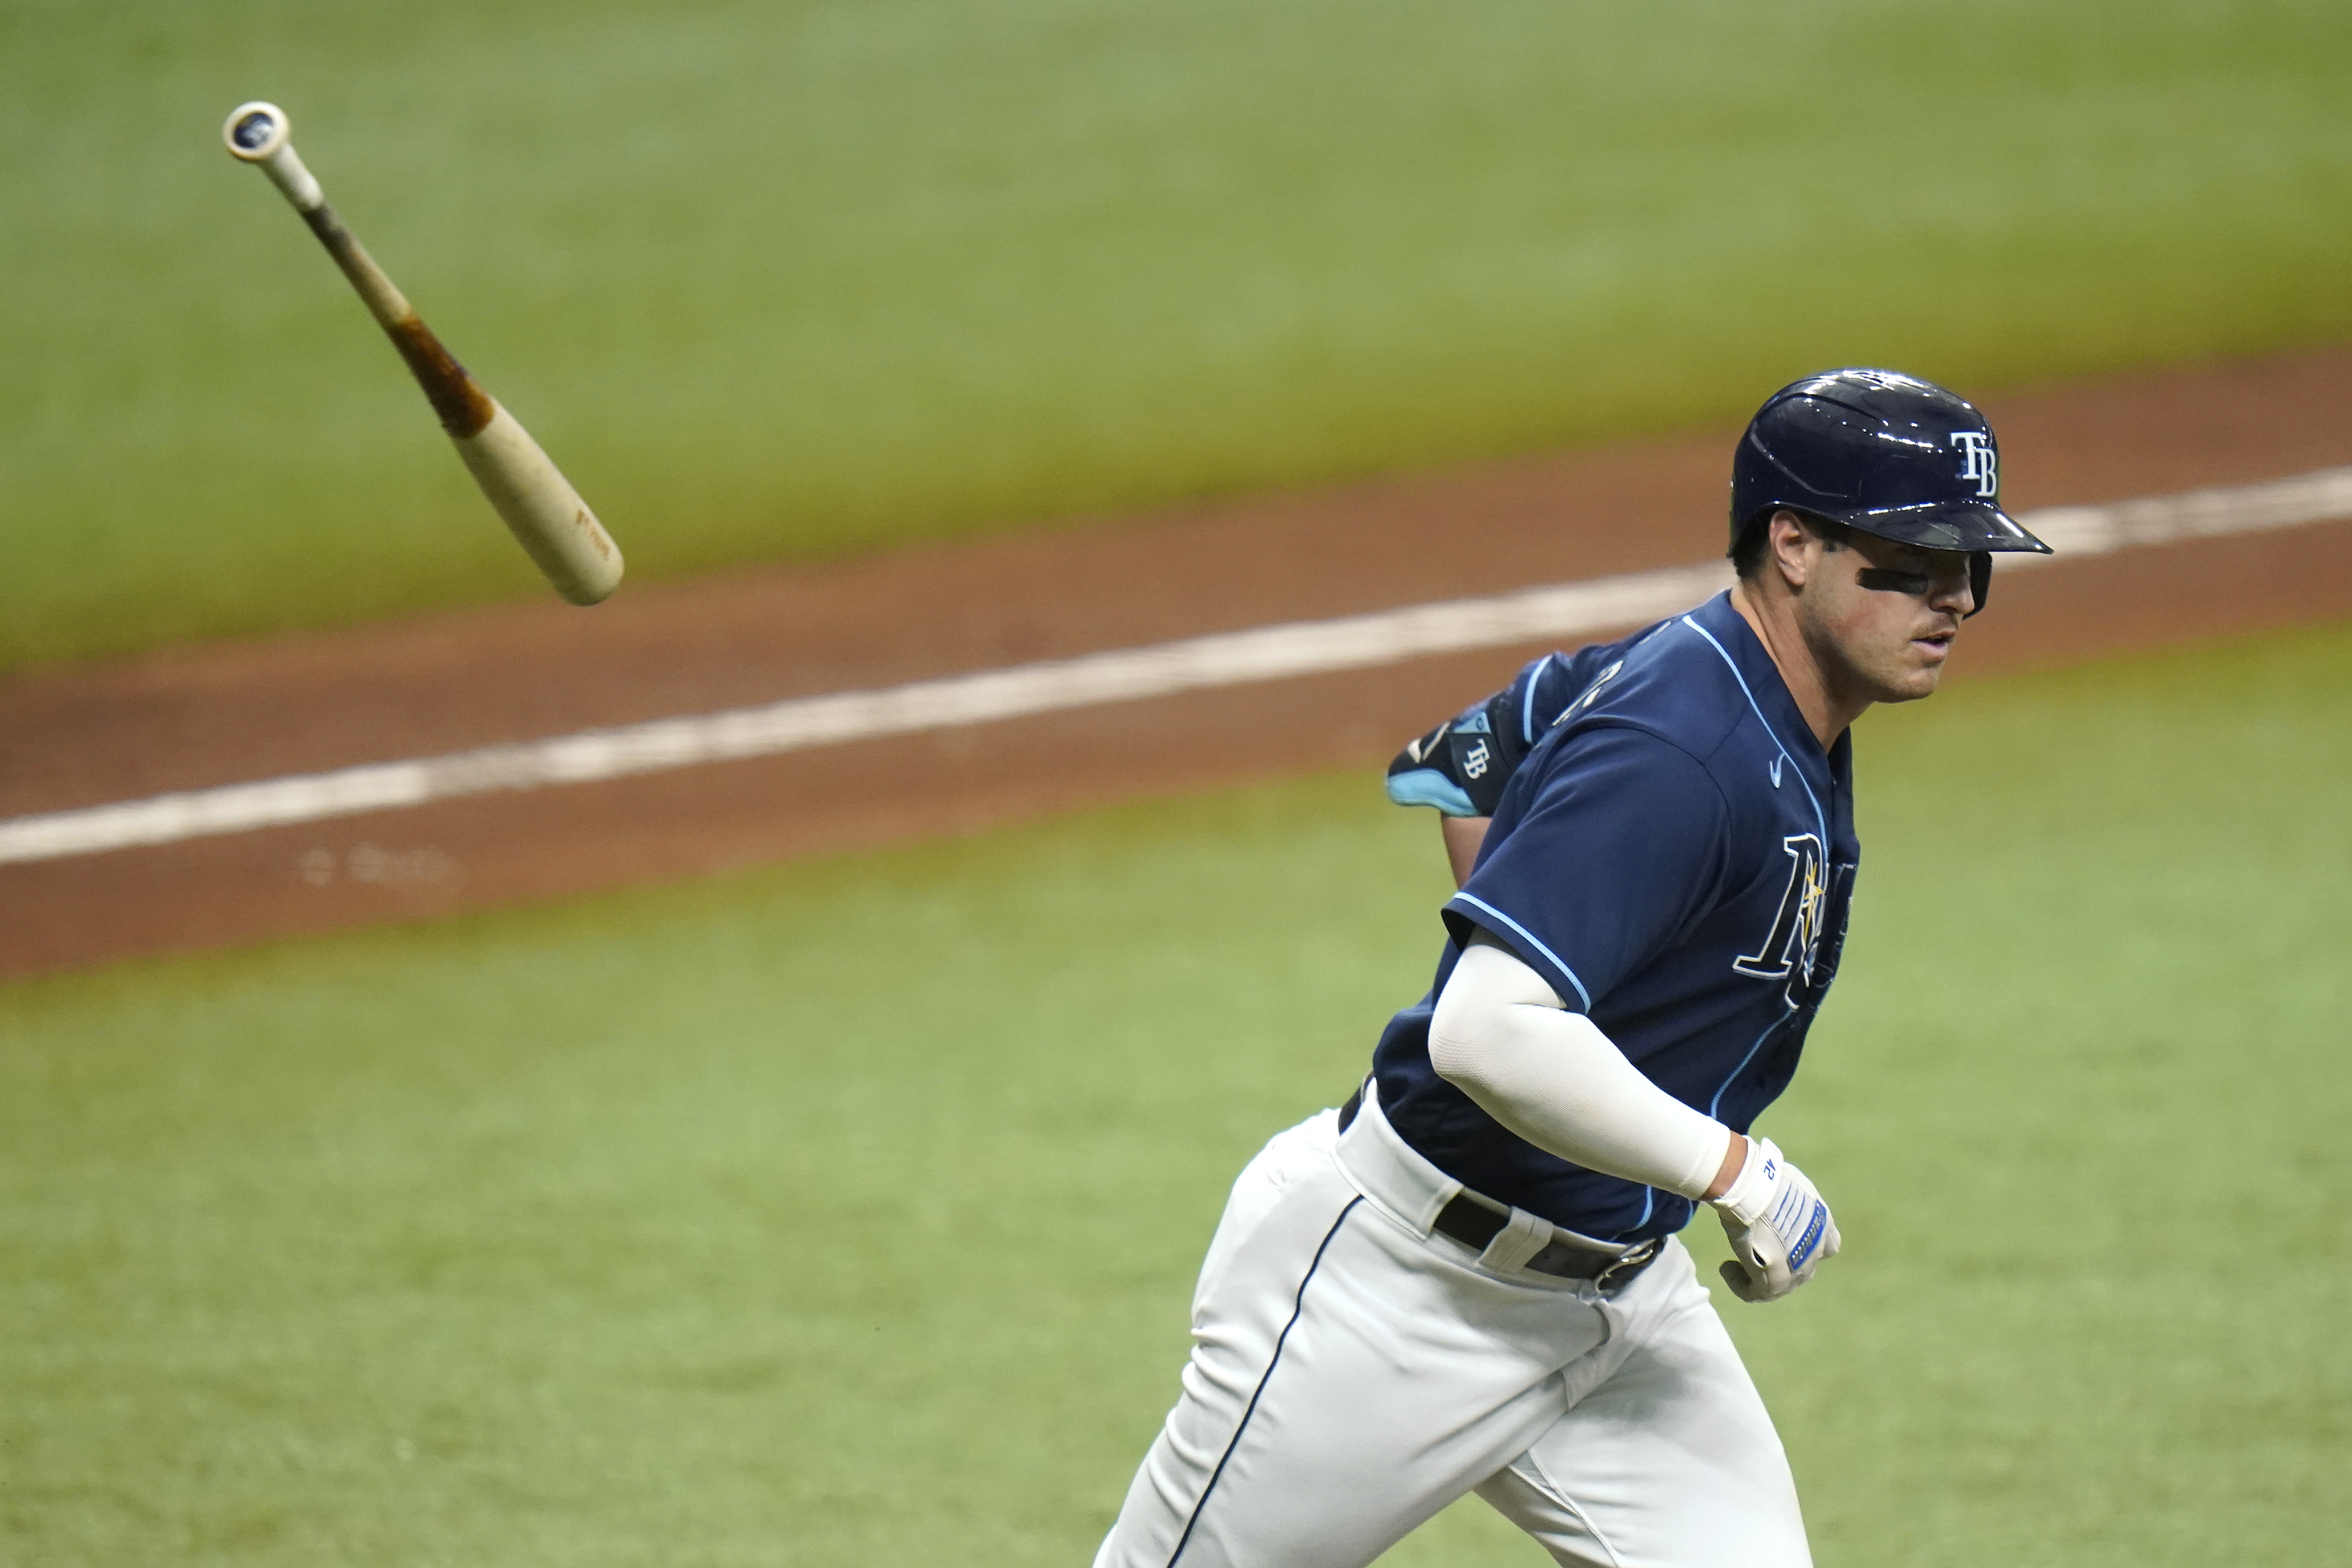 Boston Red Sox drafted Hunter Renfroe in 2010 and he finally